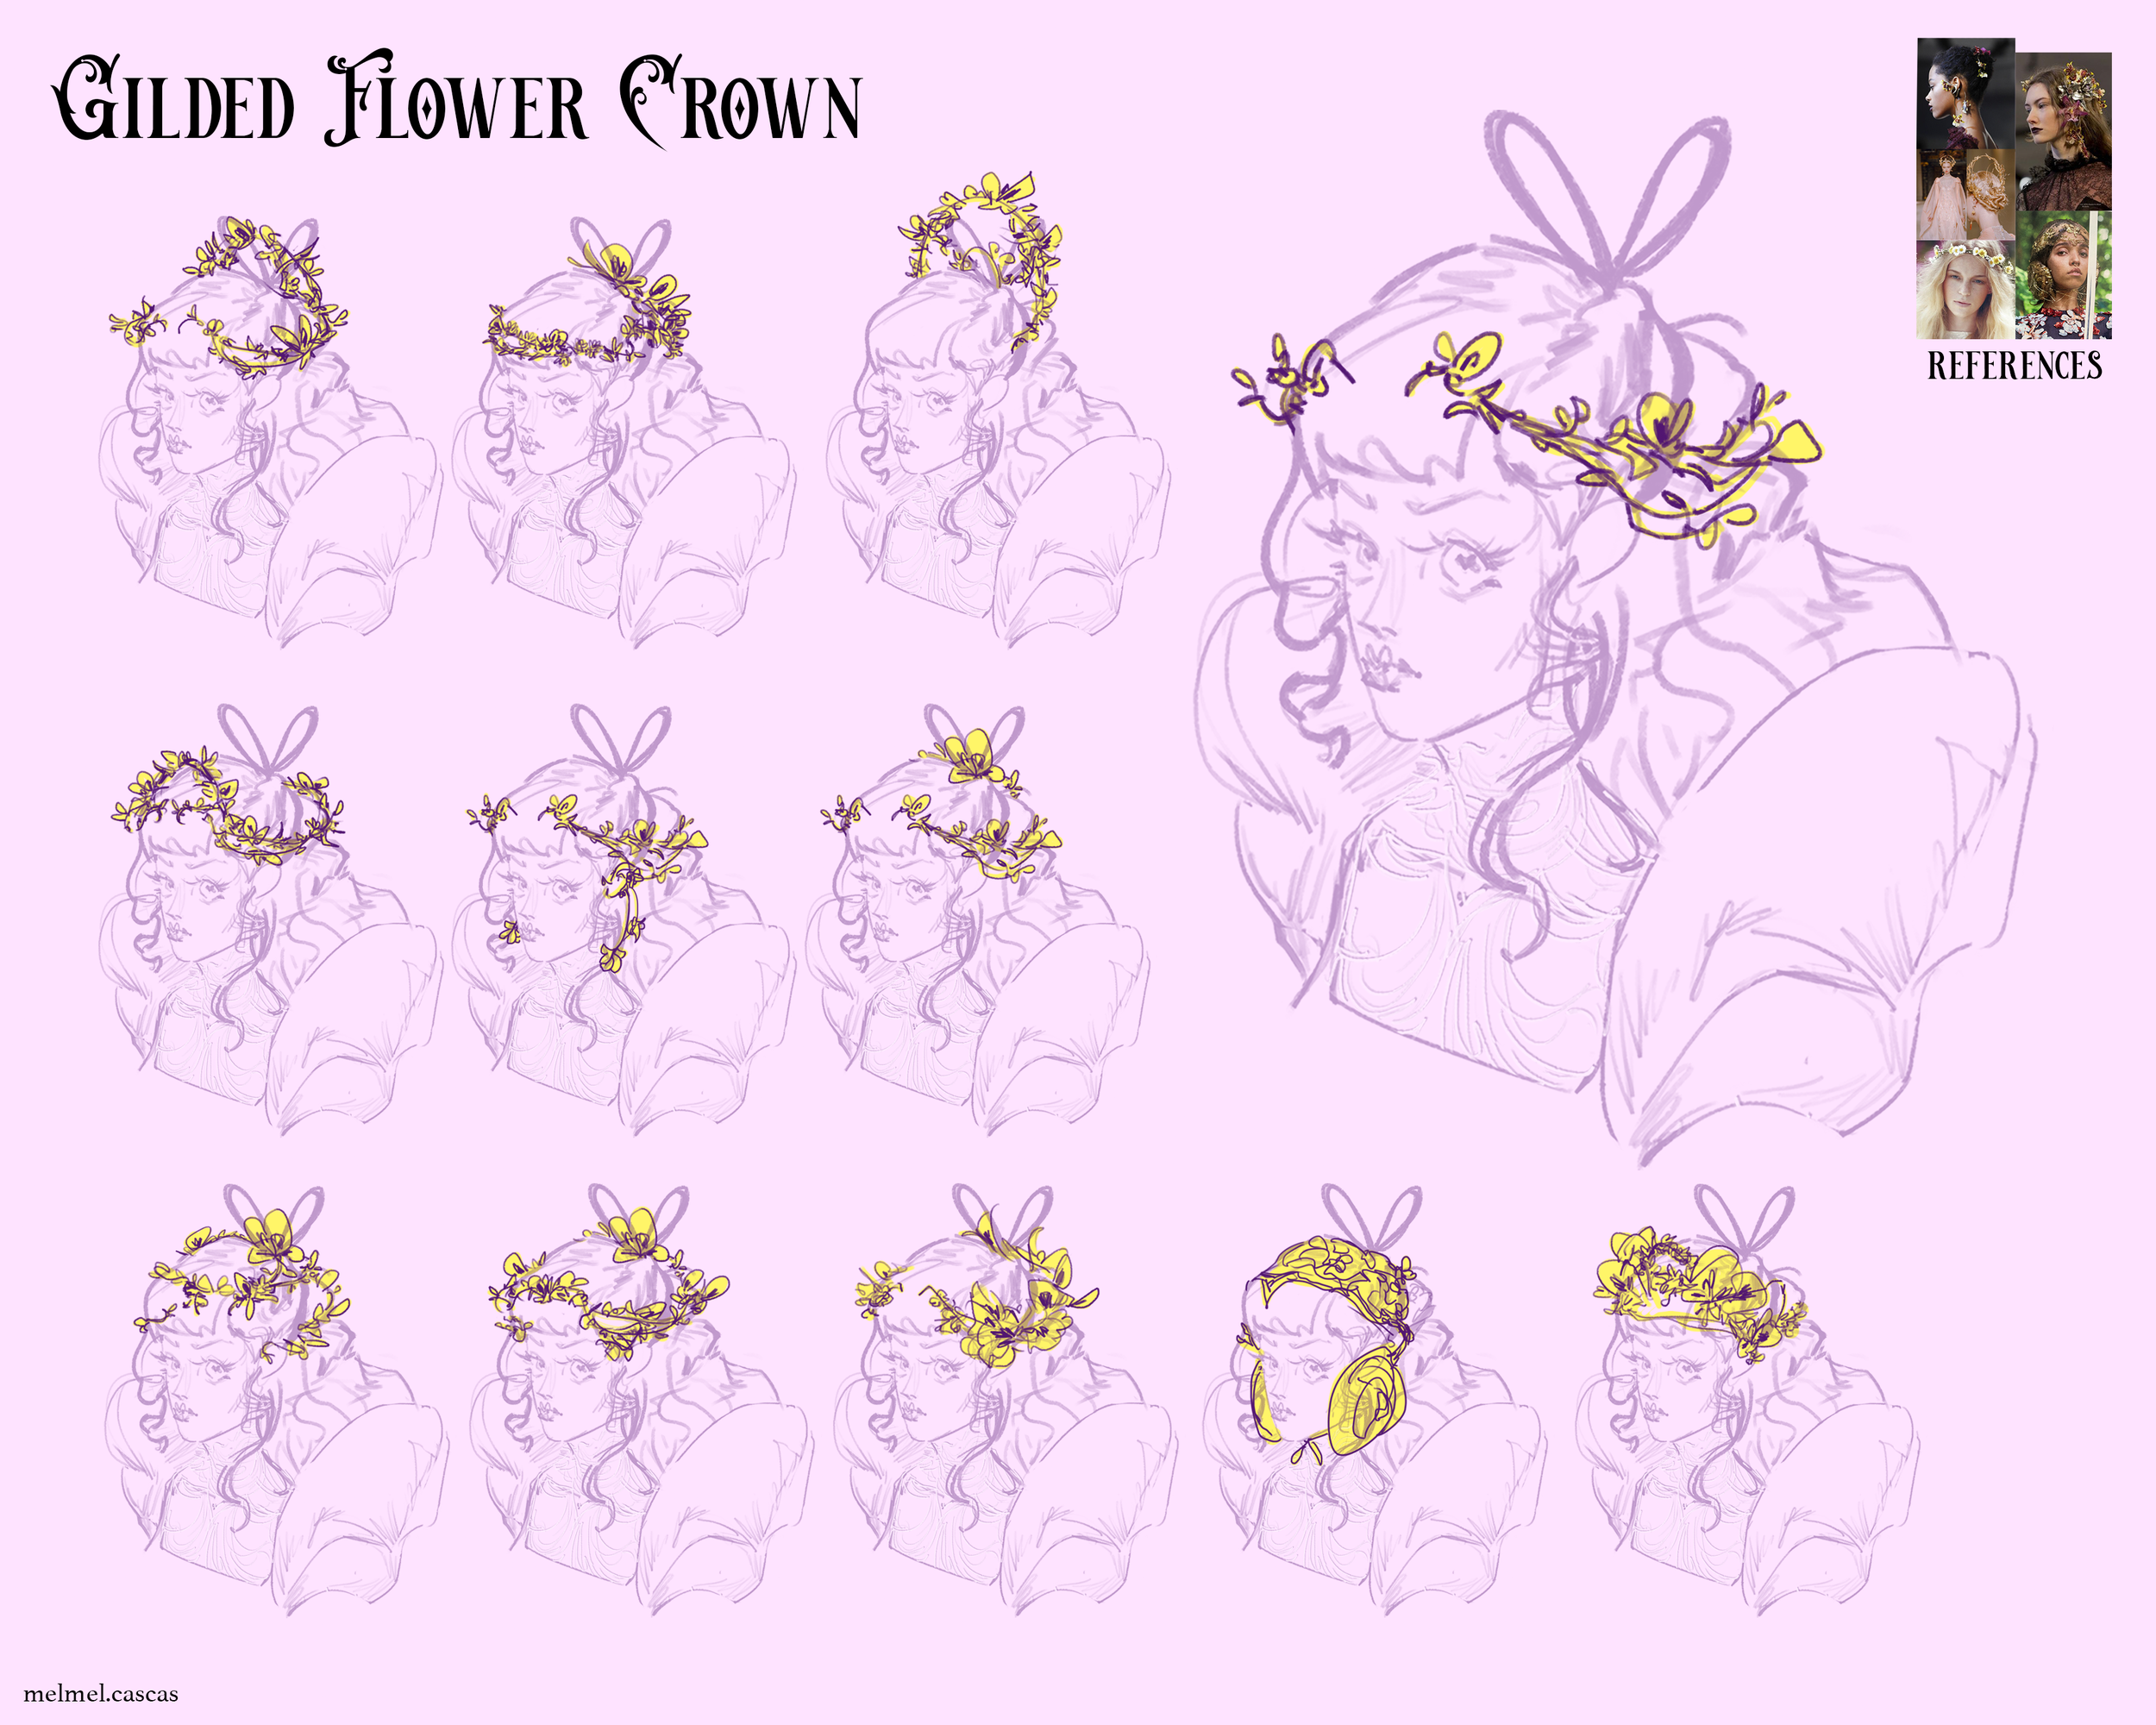 sketches of alice's gilded flower crown